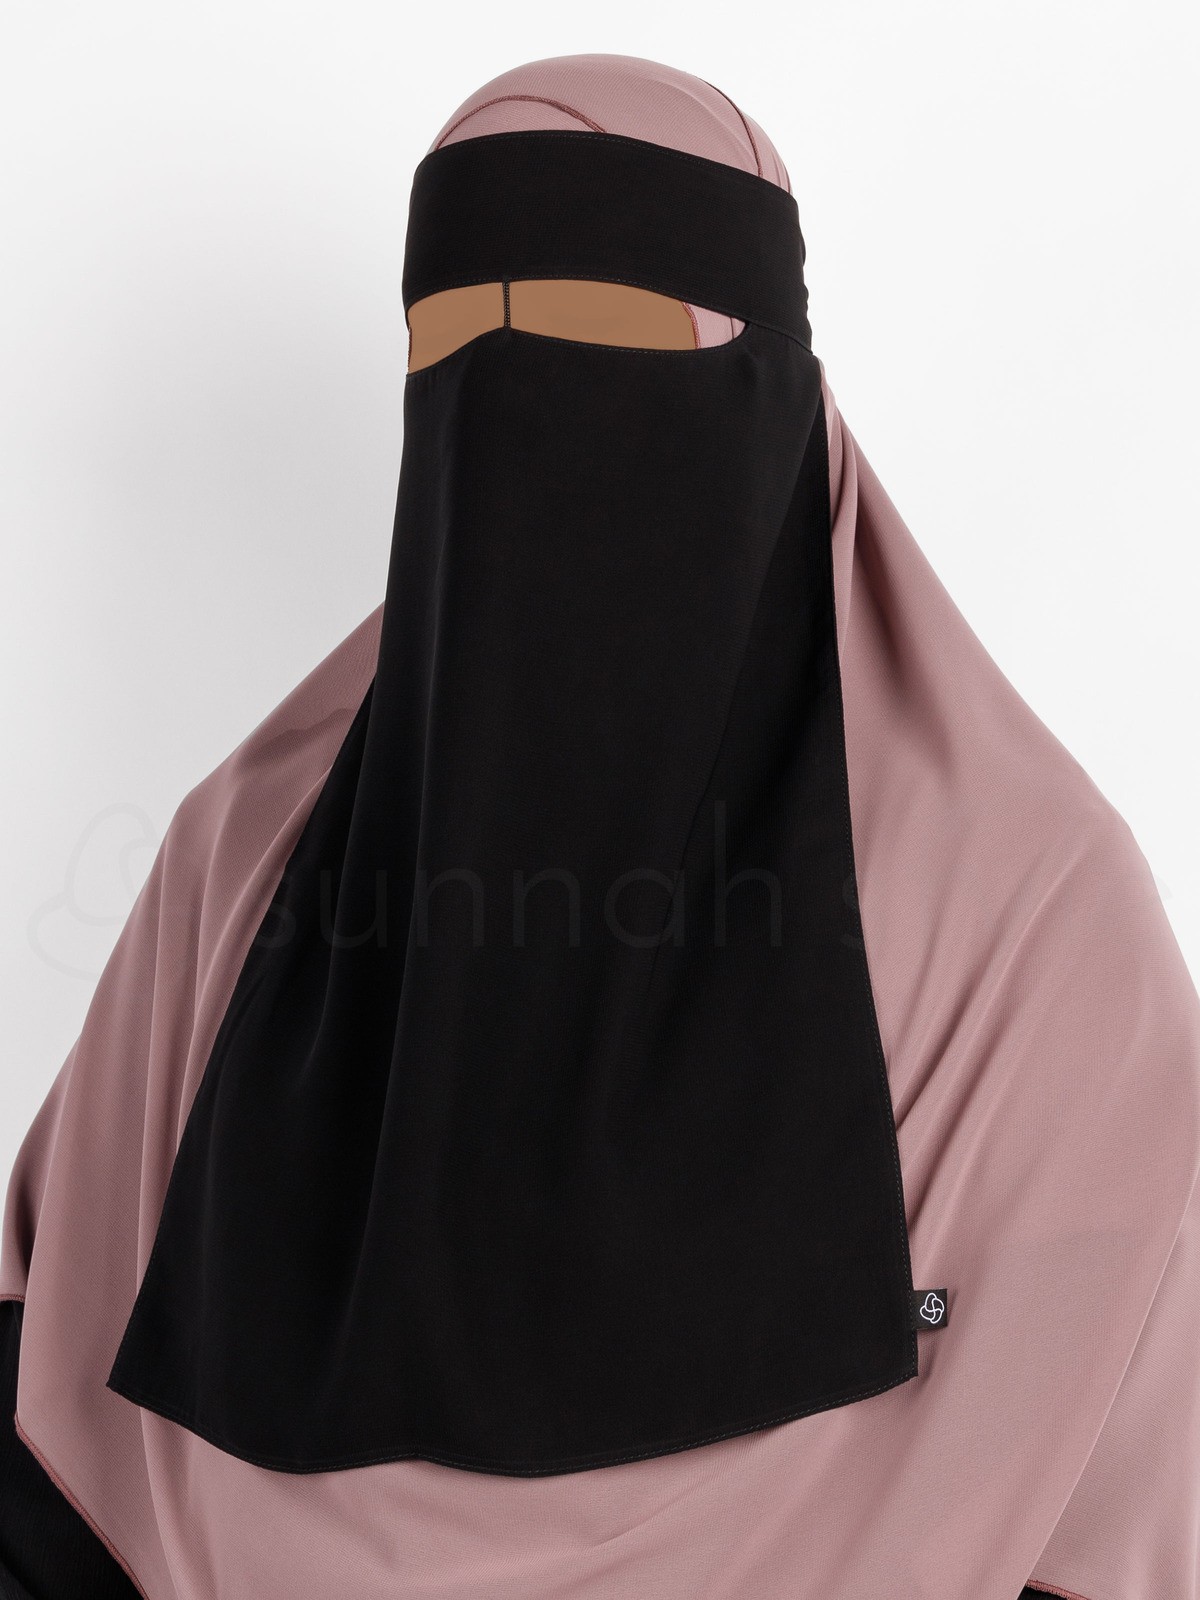 Sunnah Style - One Layer Niqab /w Nose String (Black)